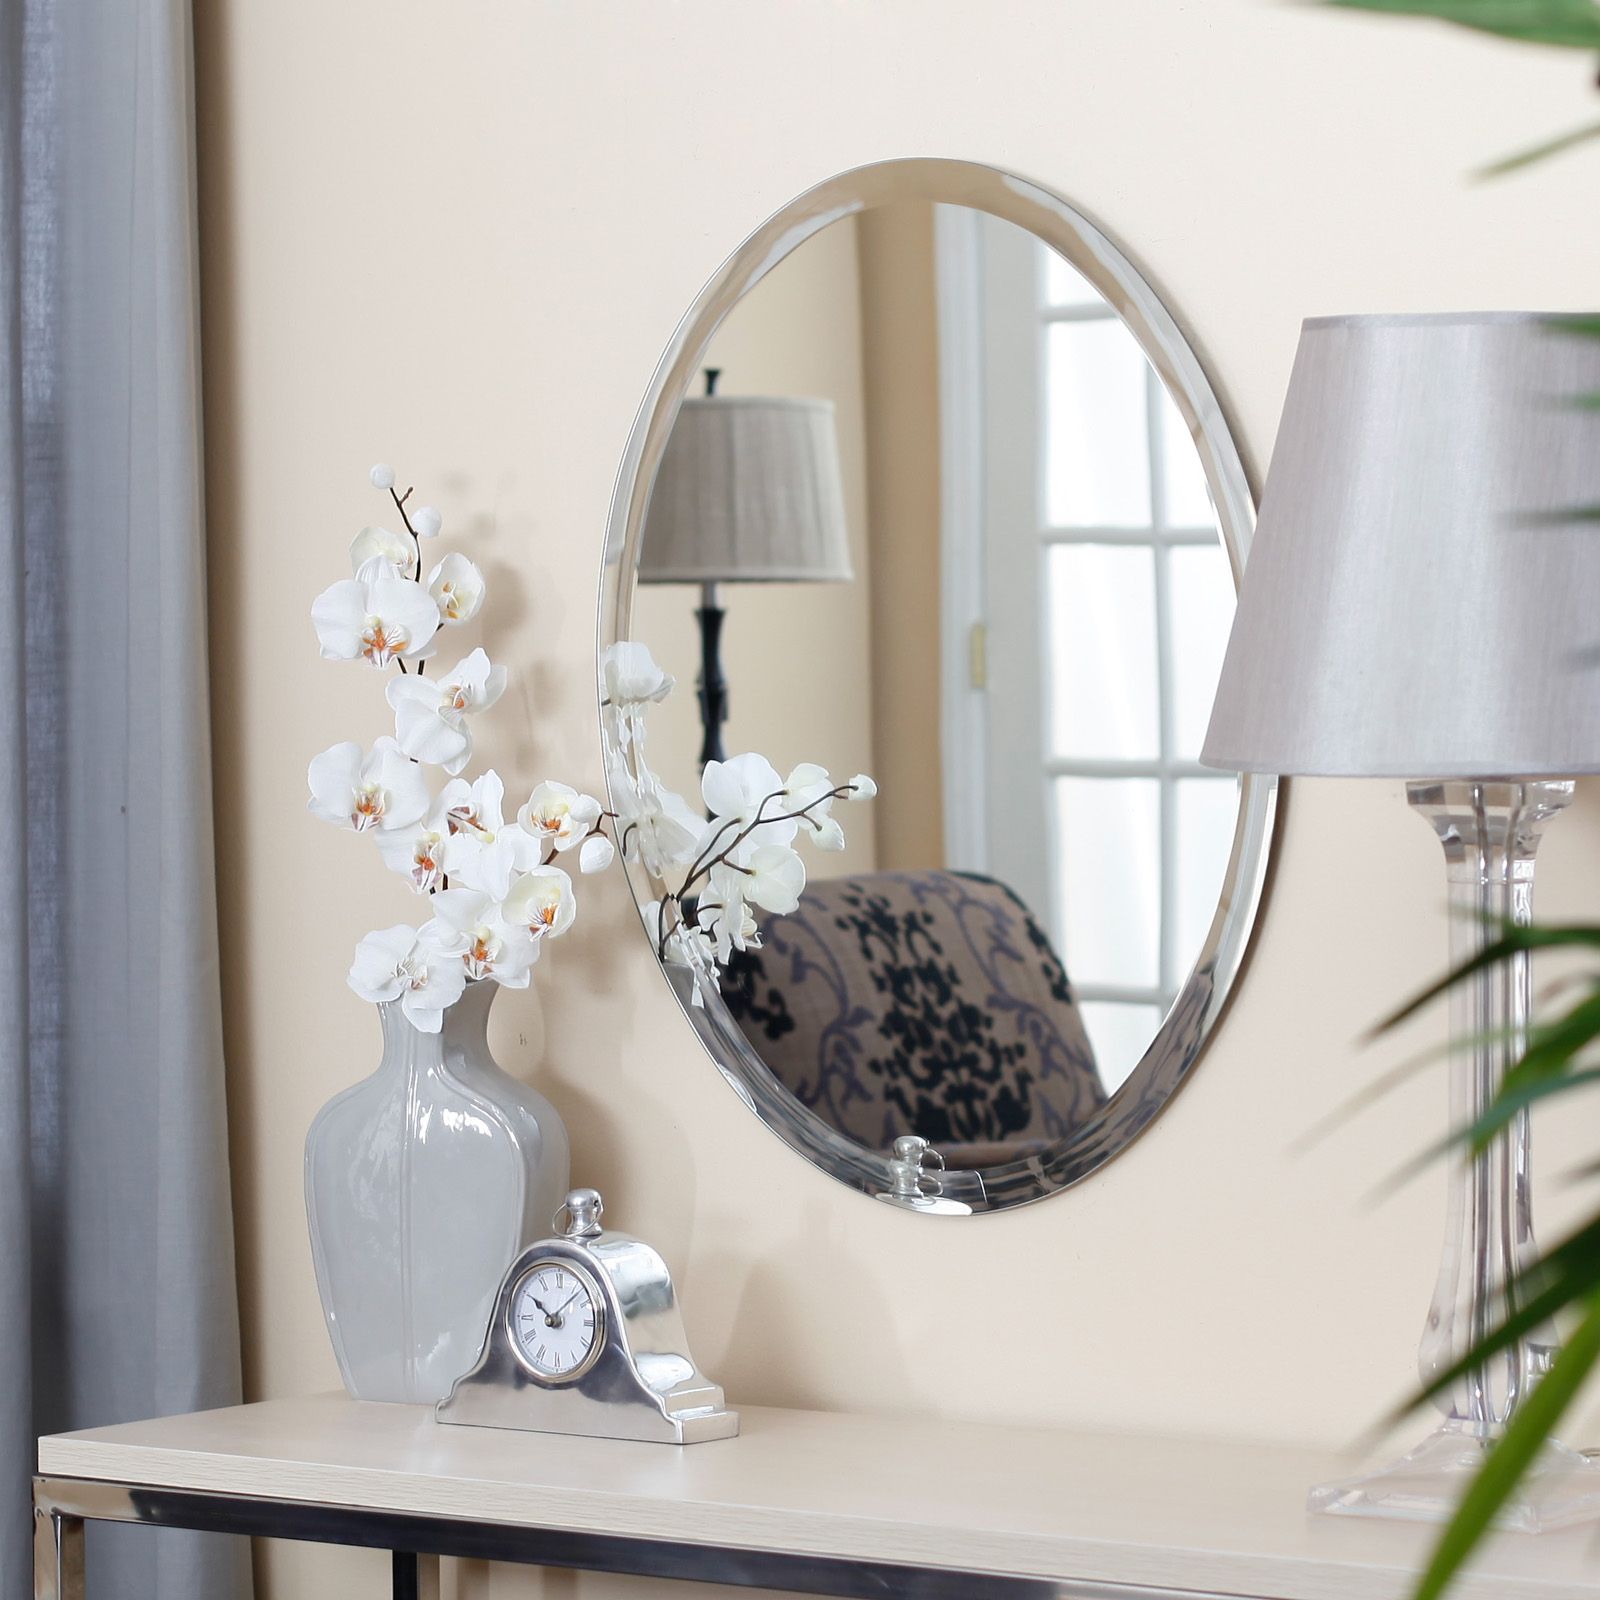 Uttermost Frameless Oval Beveled Vanity Mirror – Mirrors At Hayneedle Throughout Thornbury Oval Bevel Frameless Wall Mirrors (View 12 of 15)